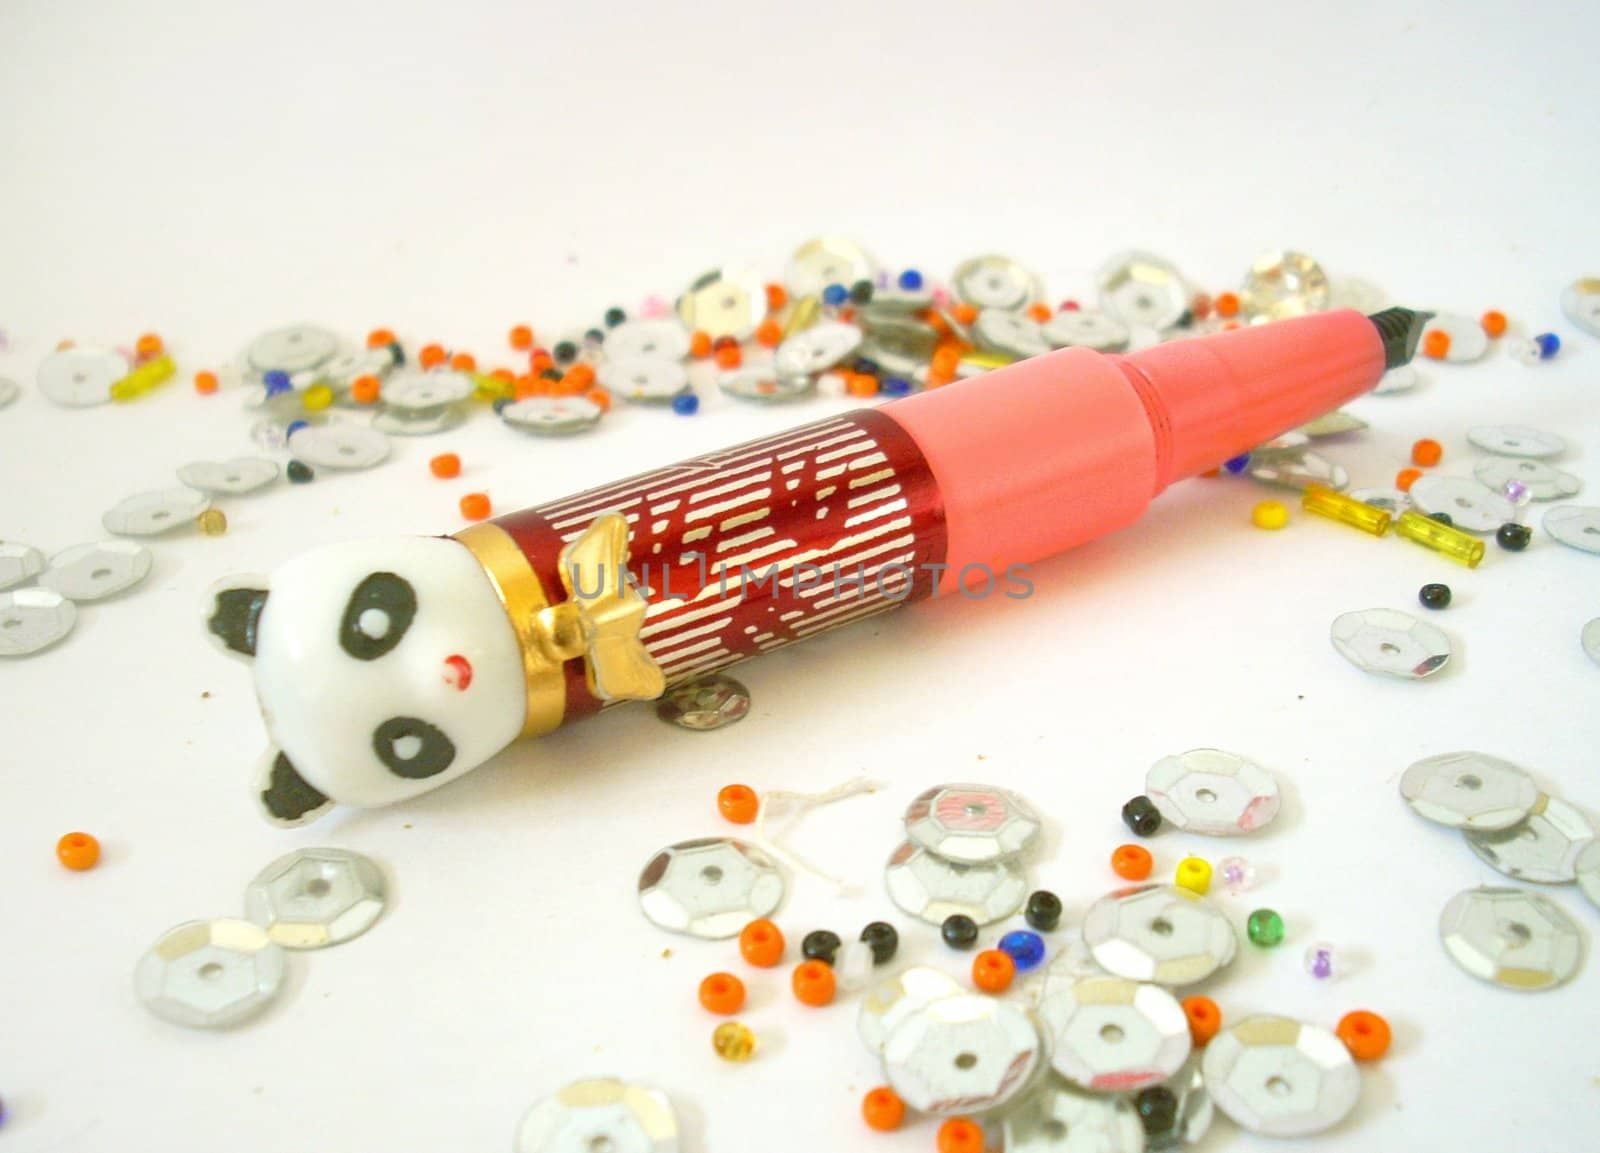 Toy pen and shining beads